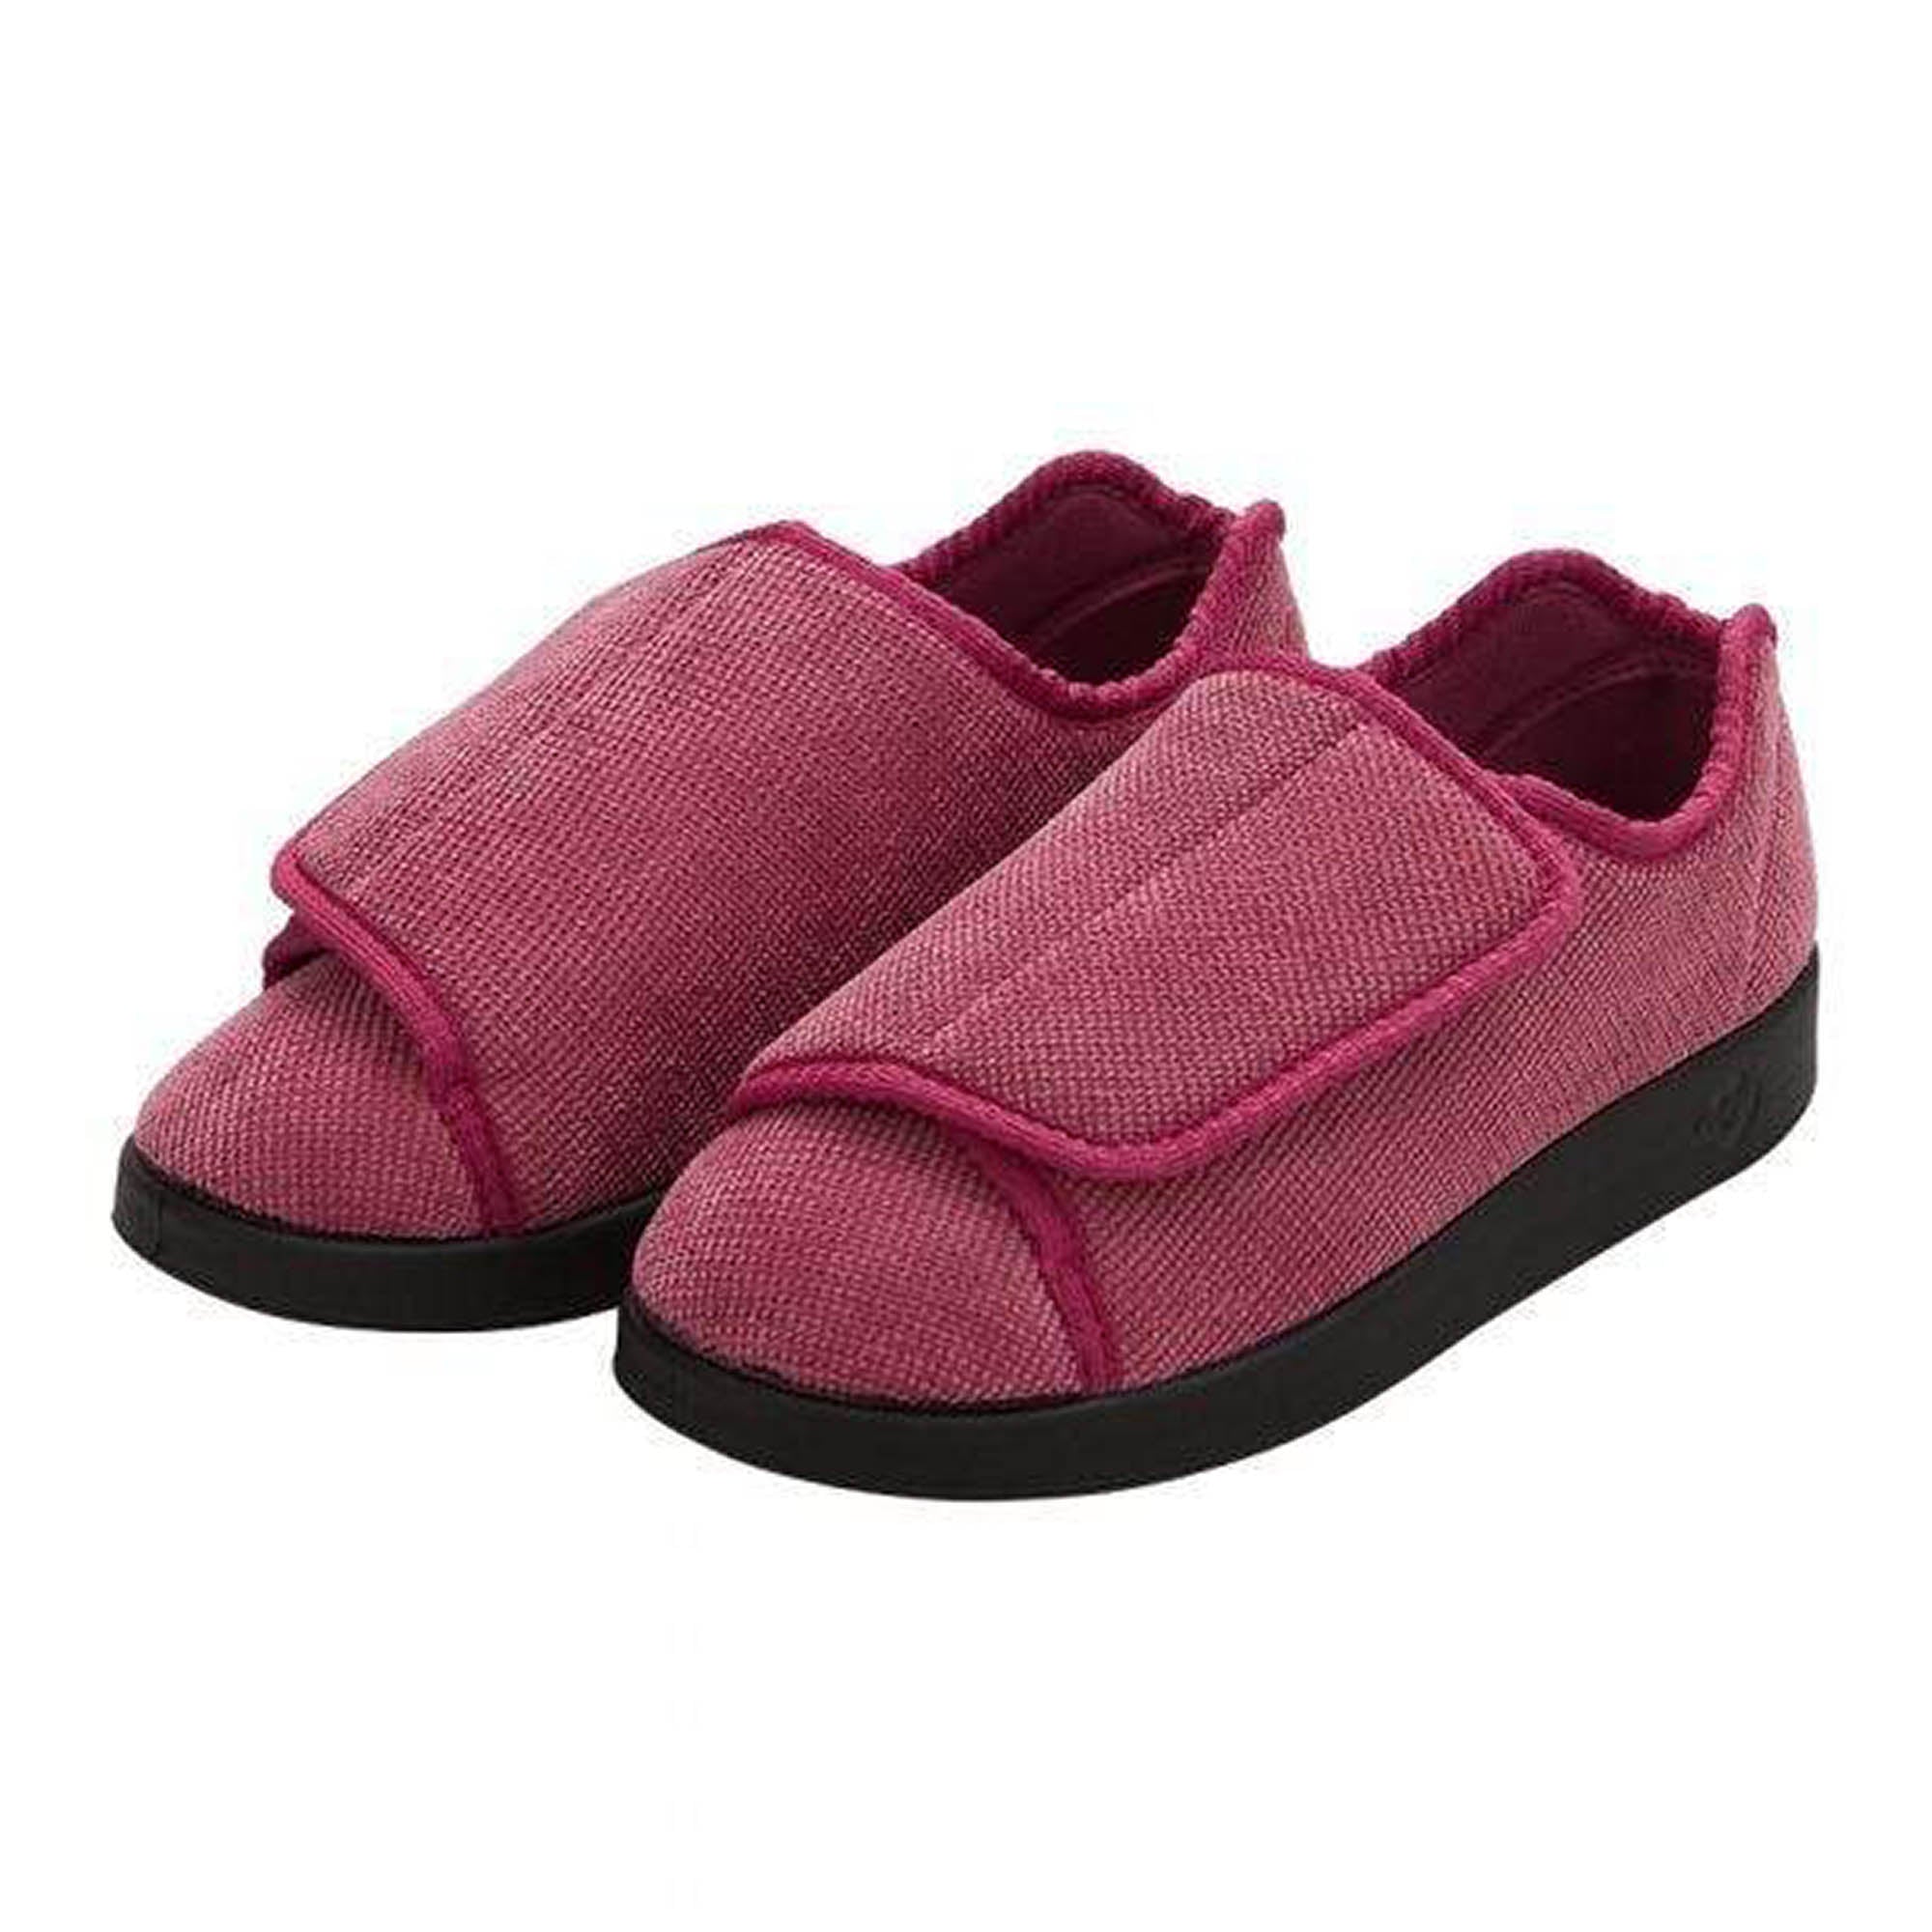 Silverts Women's Antimicrobial Extra Extra Wide Easy-Closure Slippers - Dusty Rose - 12